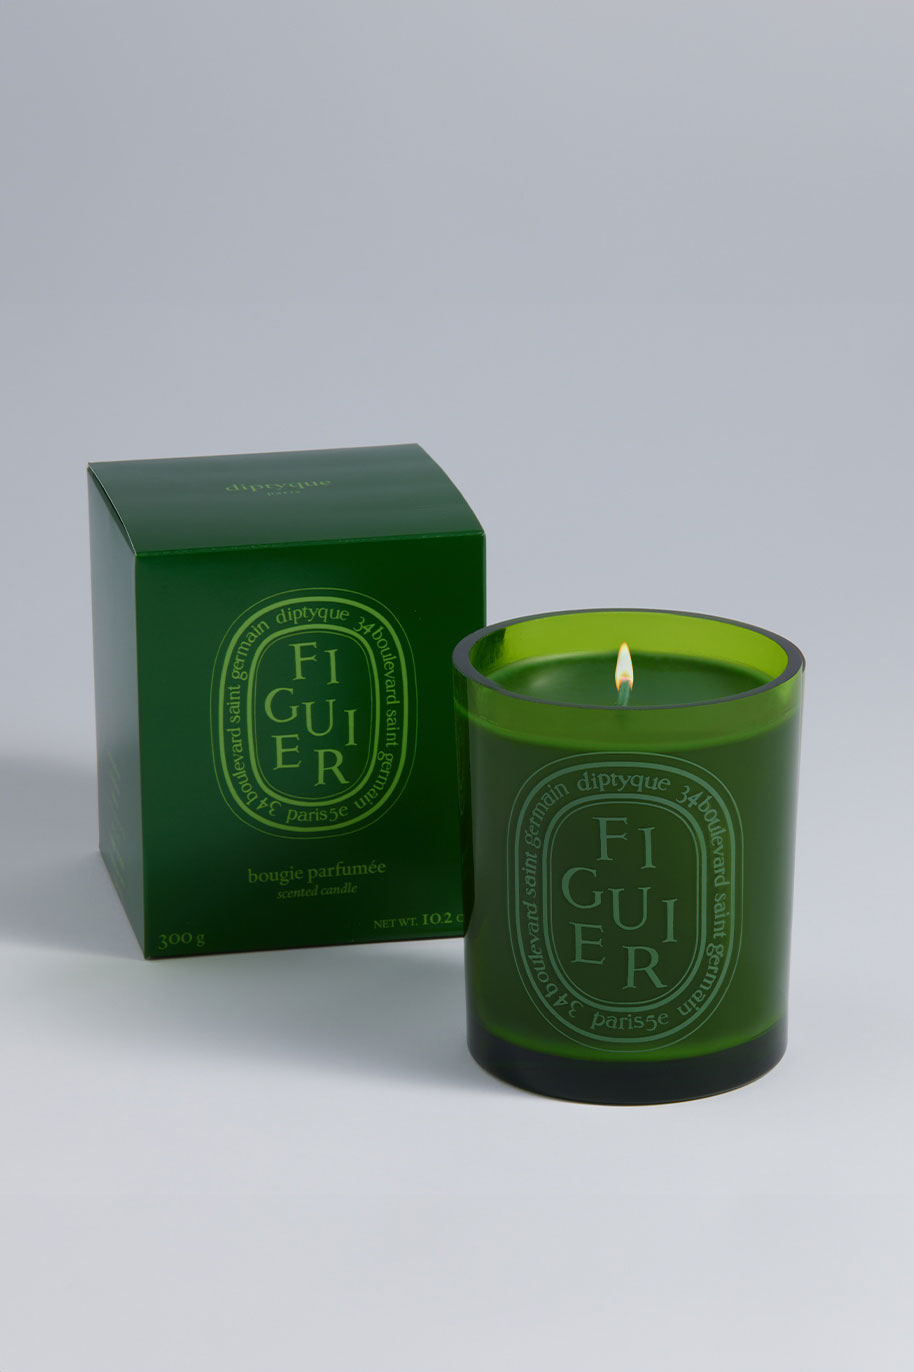 Diptyque for The Ritz-Carlton Figuier/Fig Tree Porcelain Candle